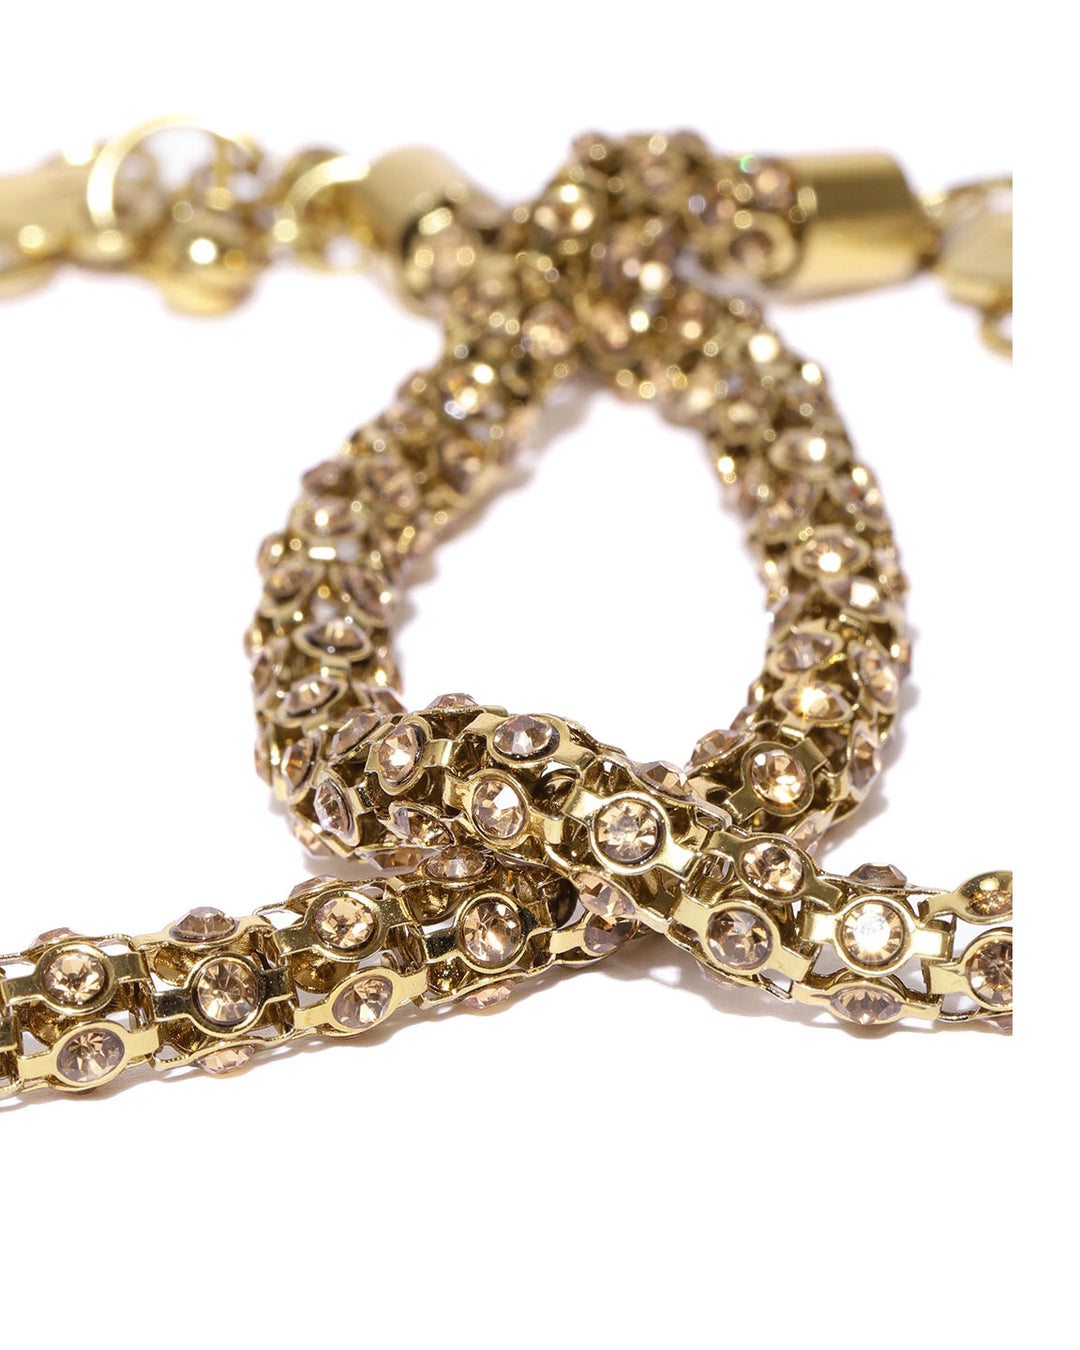 Gold-Toned Stone-Studded Anklets For Women And Girls